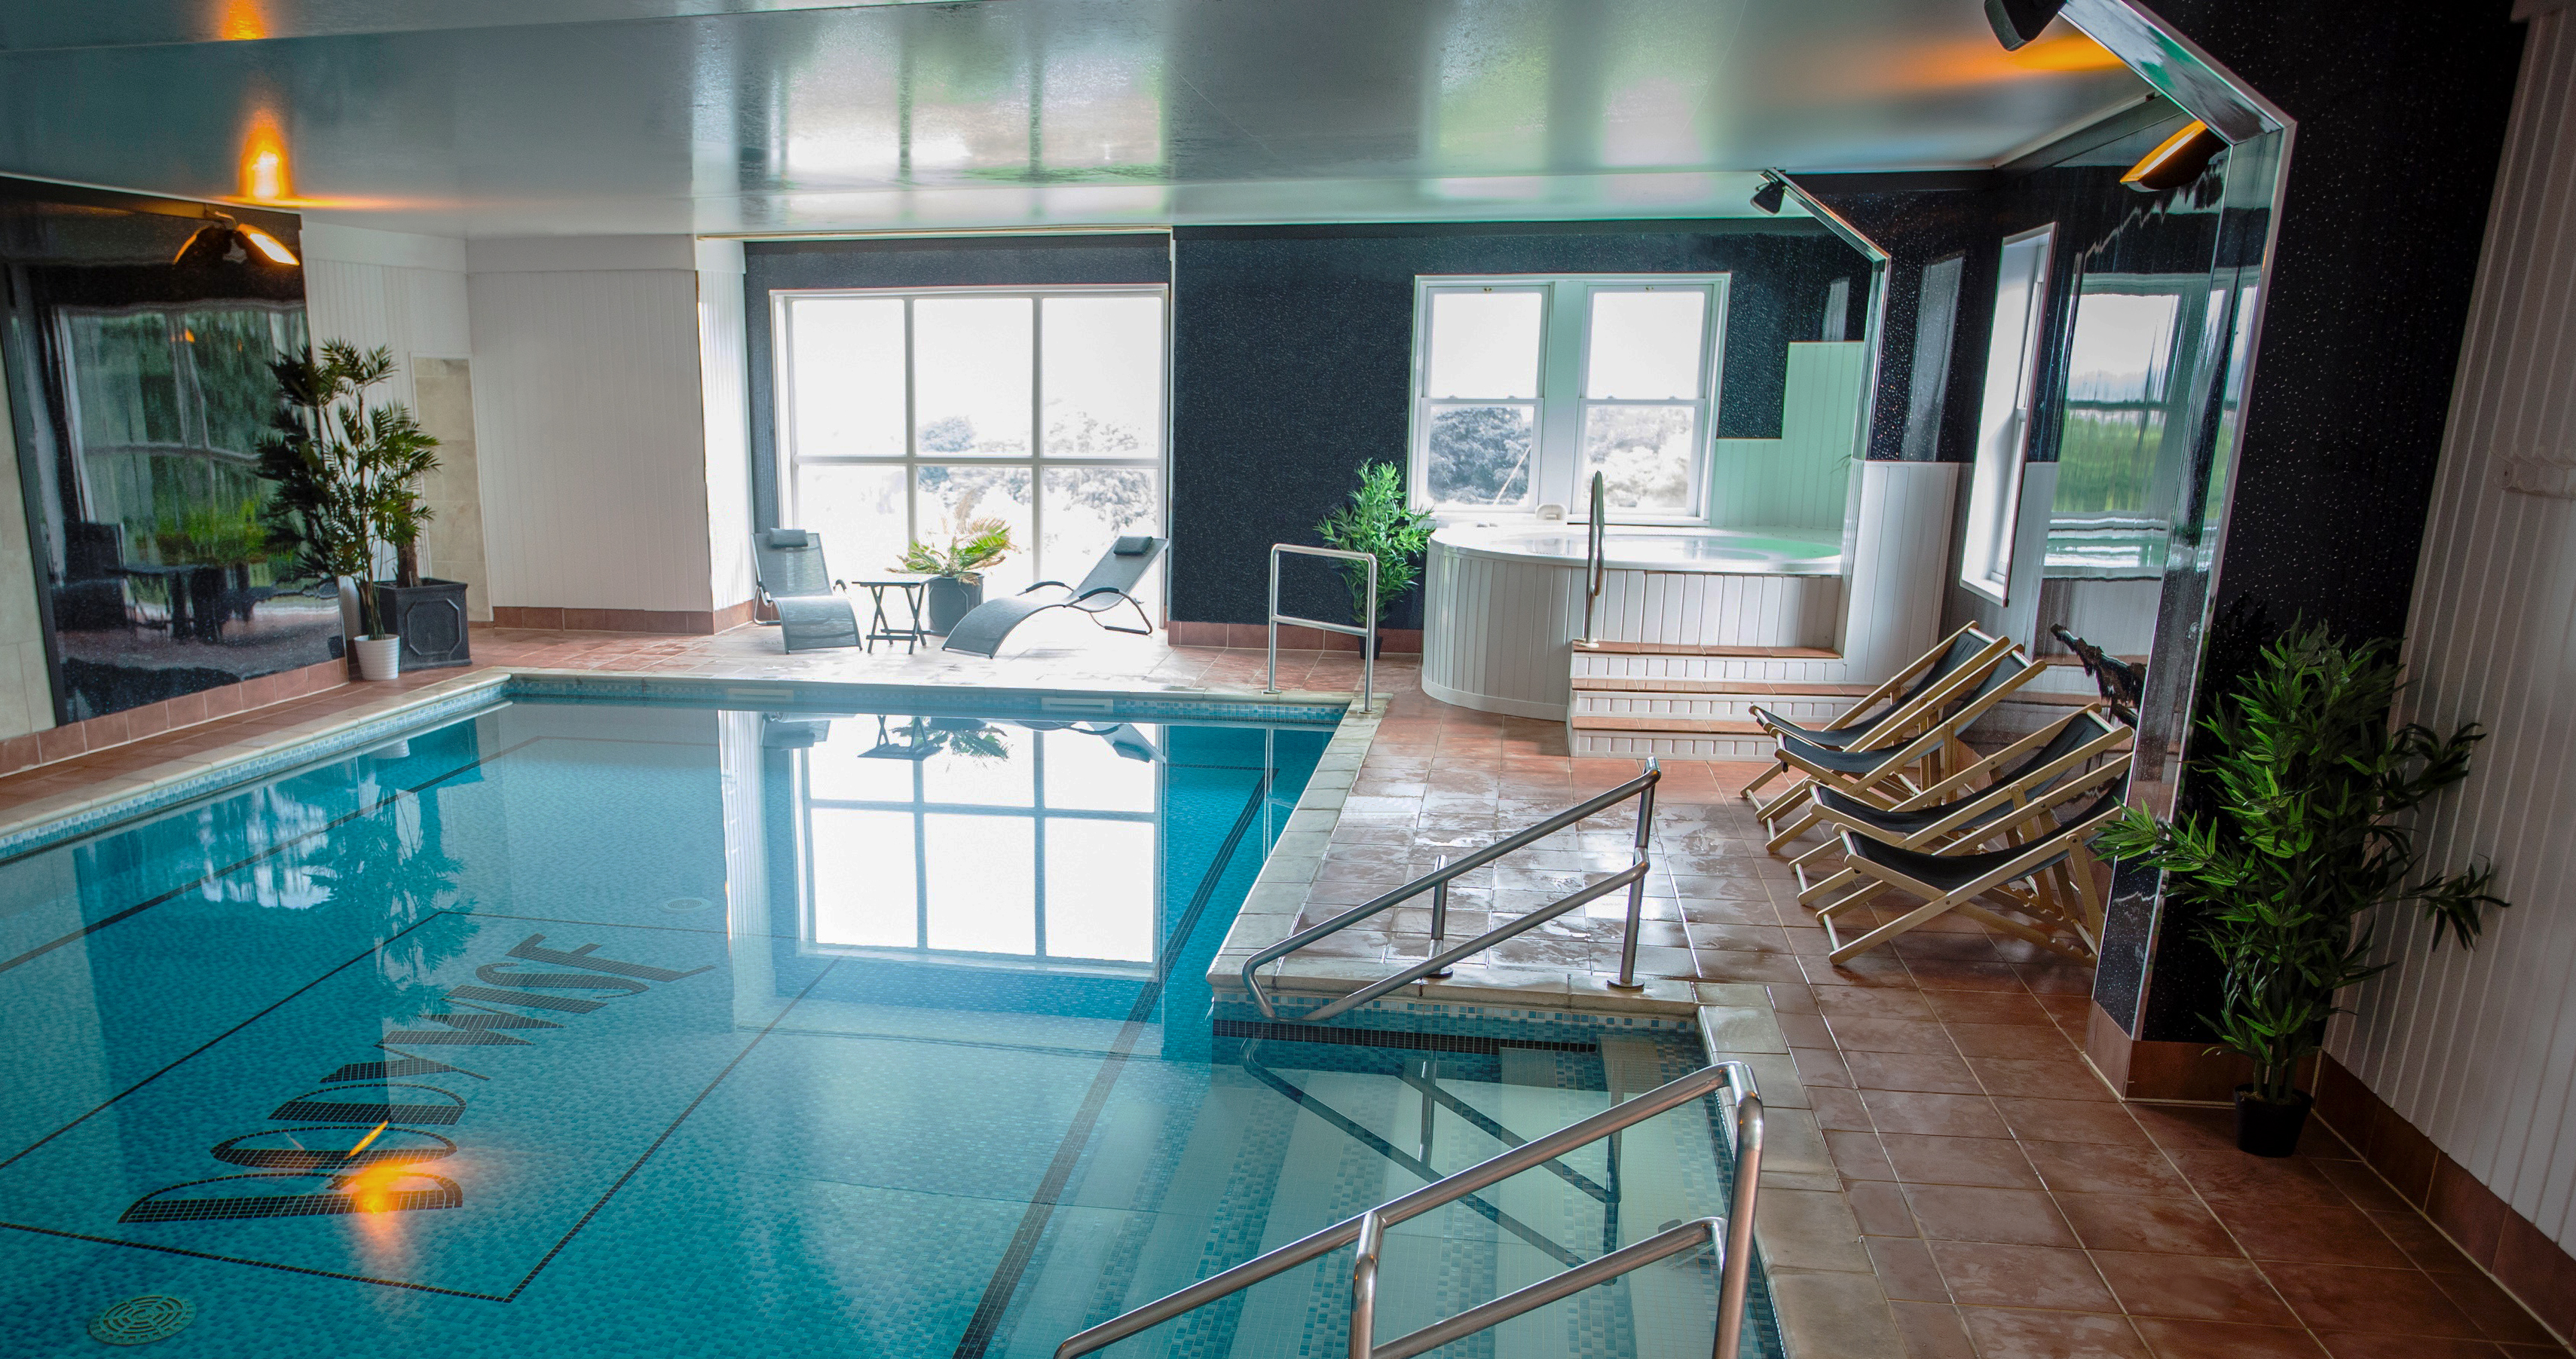 Get Muddy Spa Afternoon For Two, The Cleve Hotel And Spa